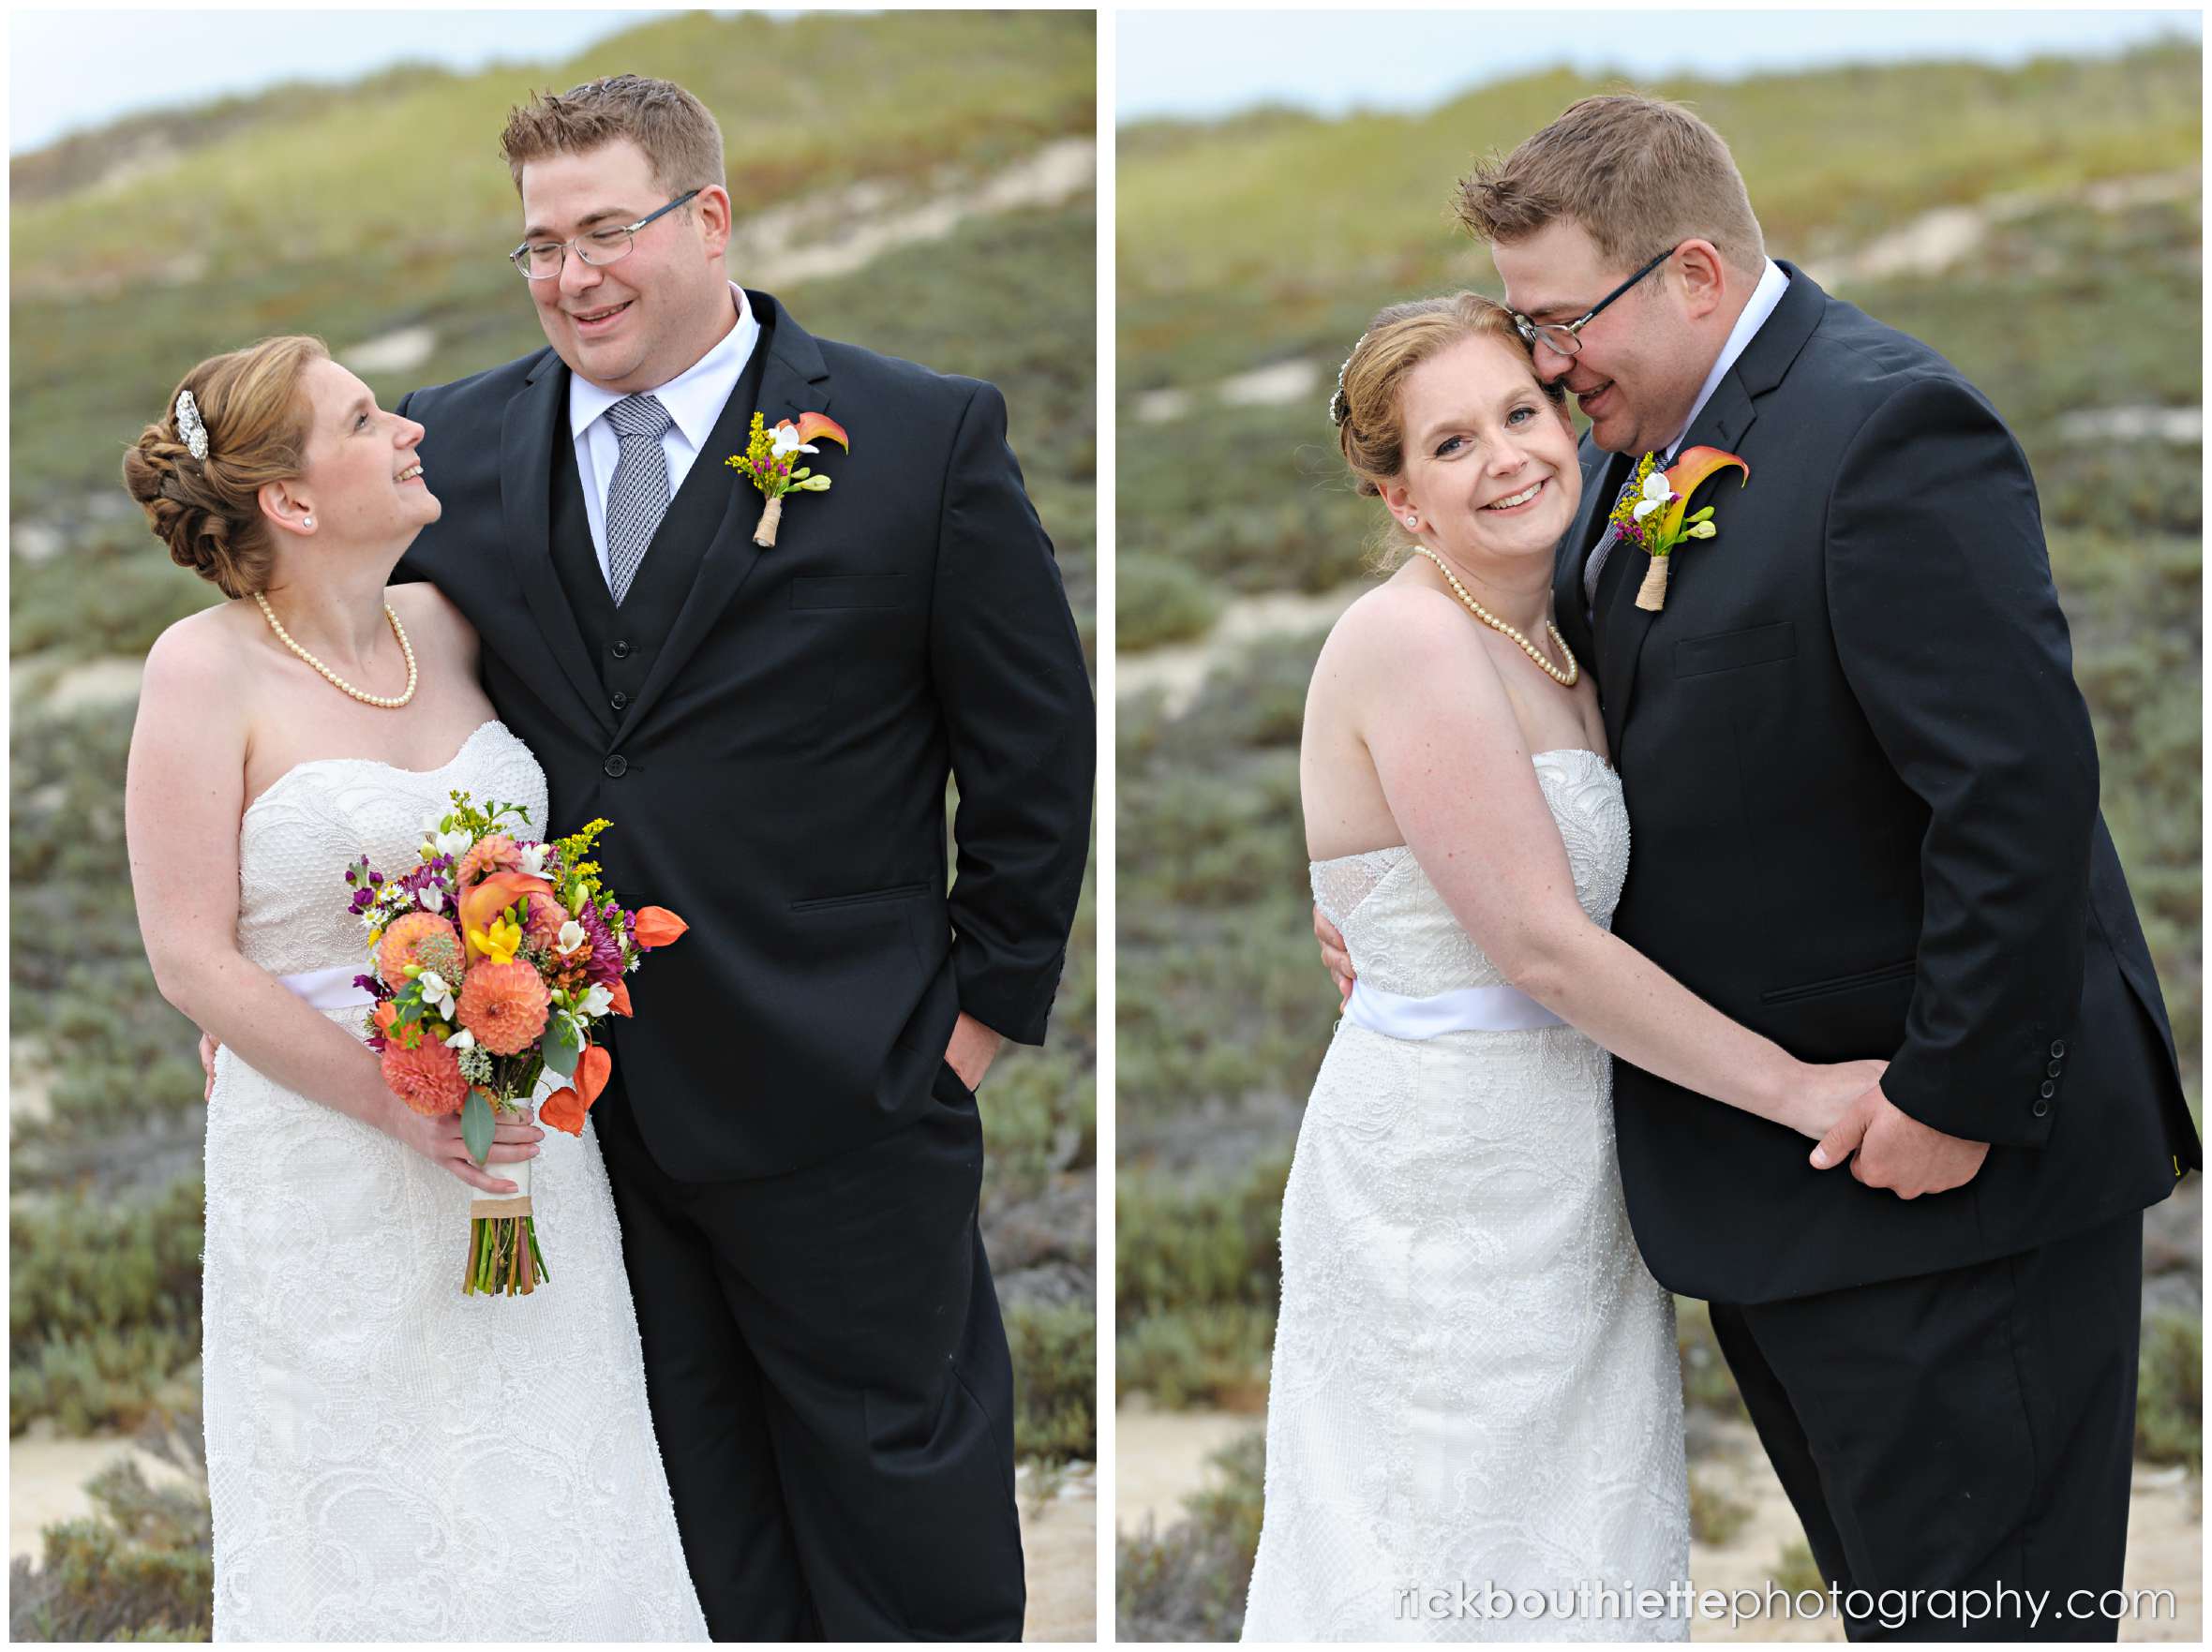 bride and groom portaits on Seabrook beach after their seacoast wedding ceremony